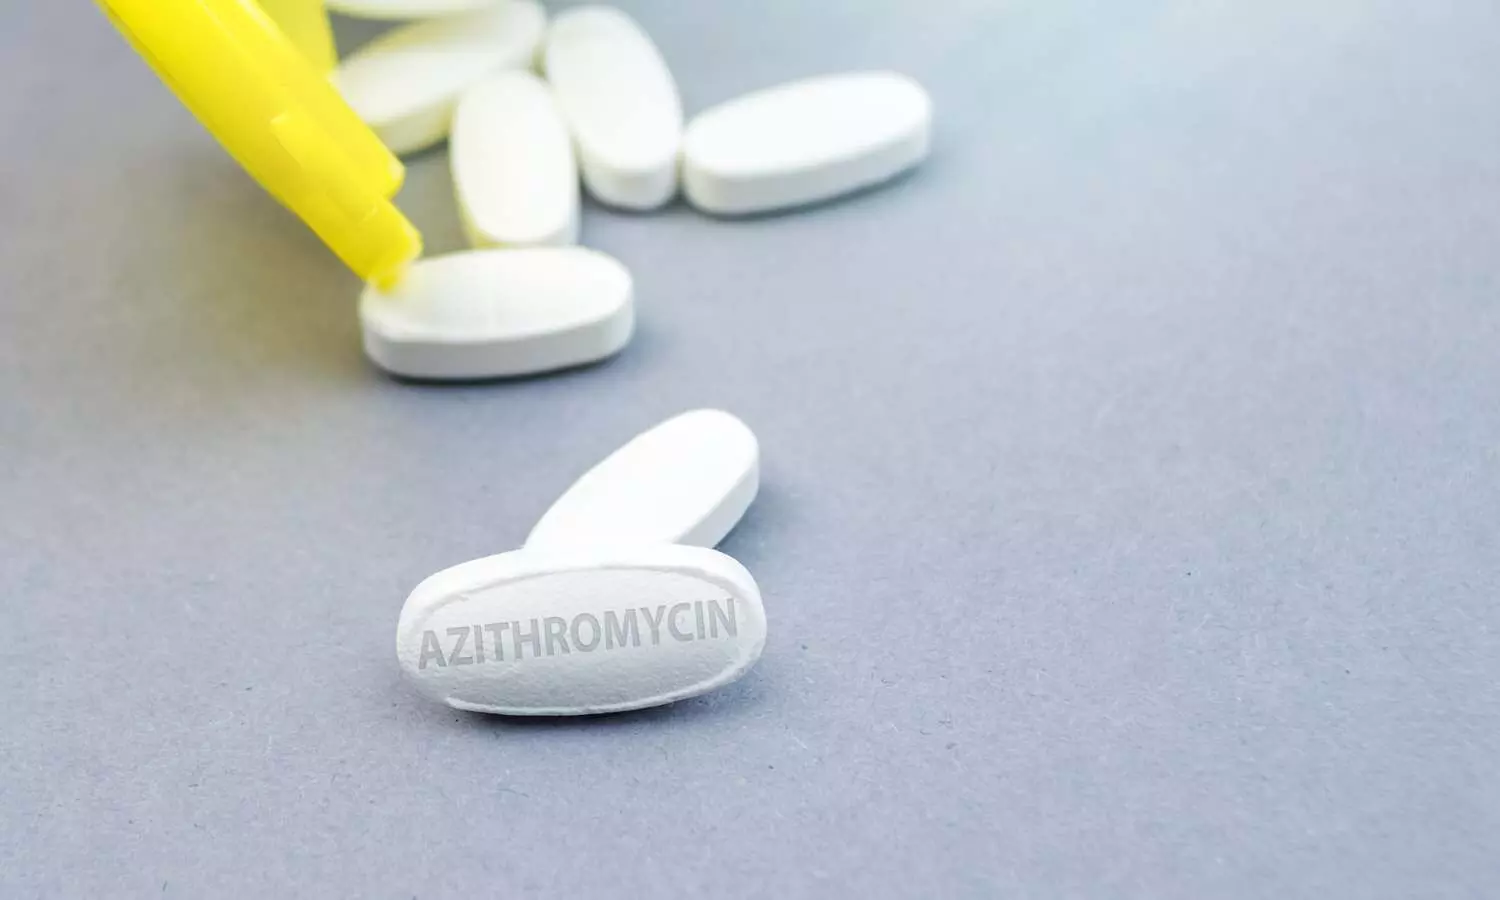 Azithromycin no better than   placebo among patients of LRTI  with low procalcitonin levels: Lancet